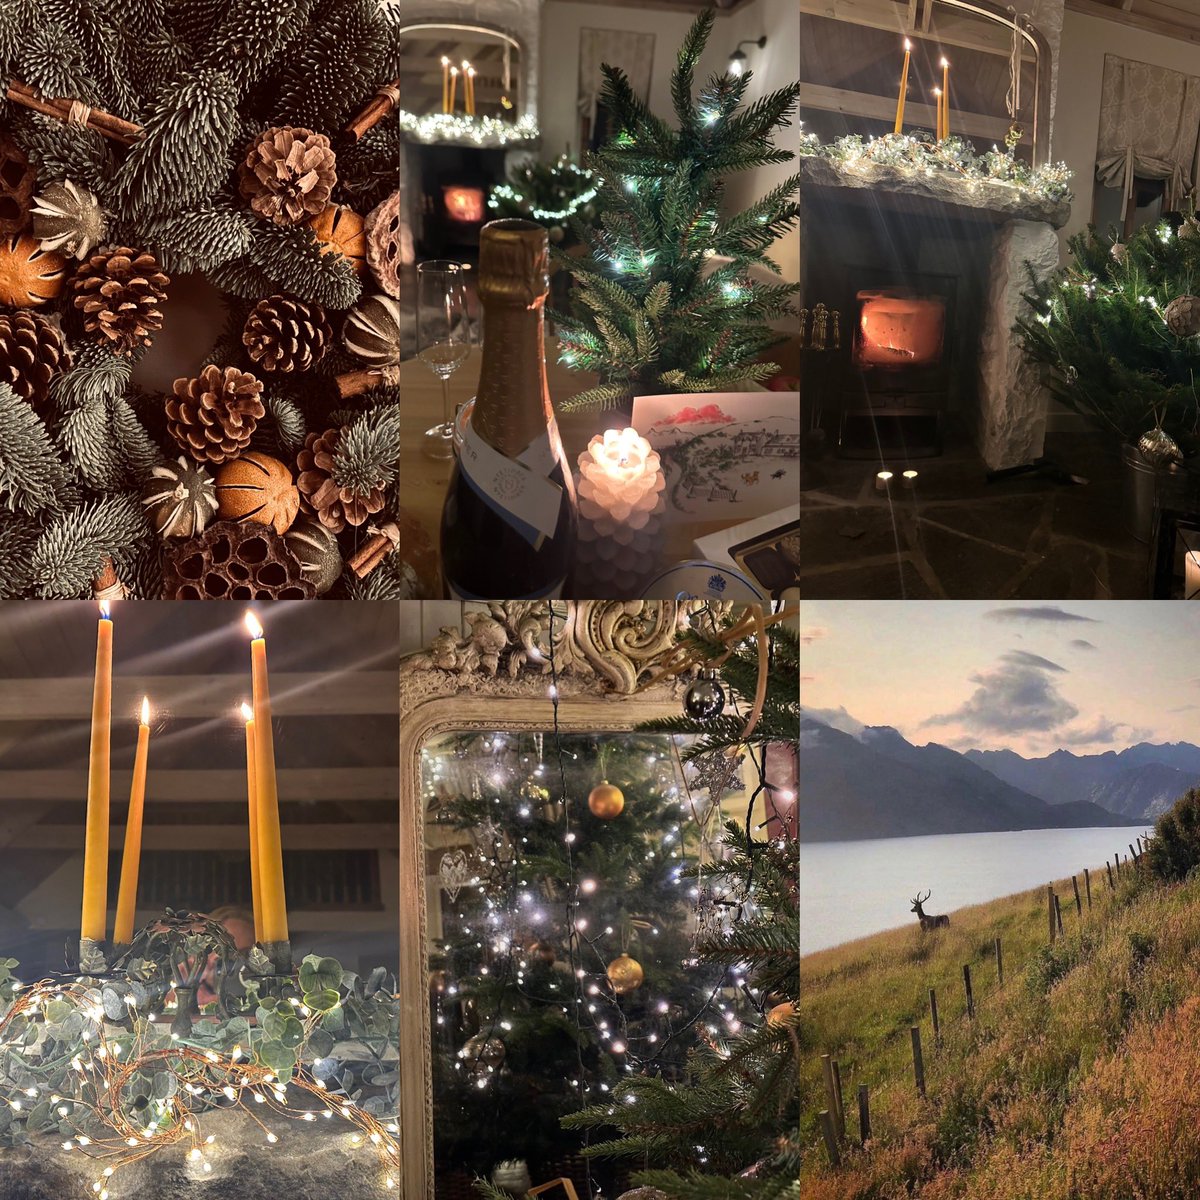 Wishing our guests, our suppliers, our community- the happiest of Christmas’s, the best of New Year’s. We can’t wait to welcome everyone in 2024 to stunning #elgol 

#peace #warmth #scotland #4tourism #skye #highlandsandislands #scotlandthebest #christmas